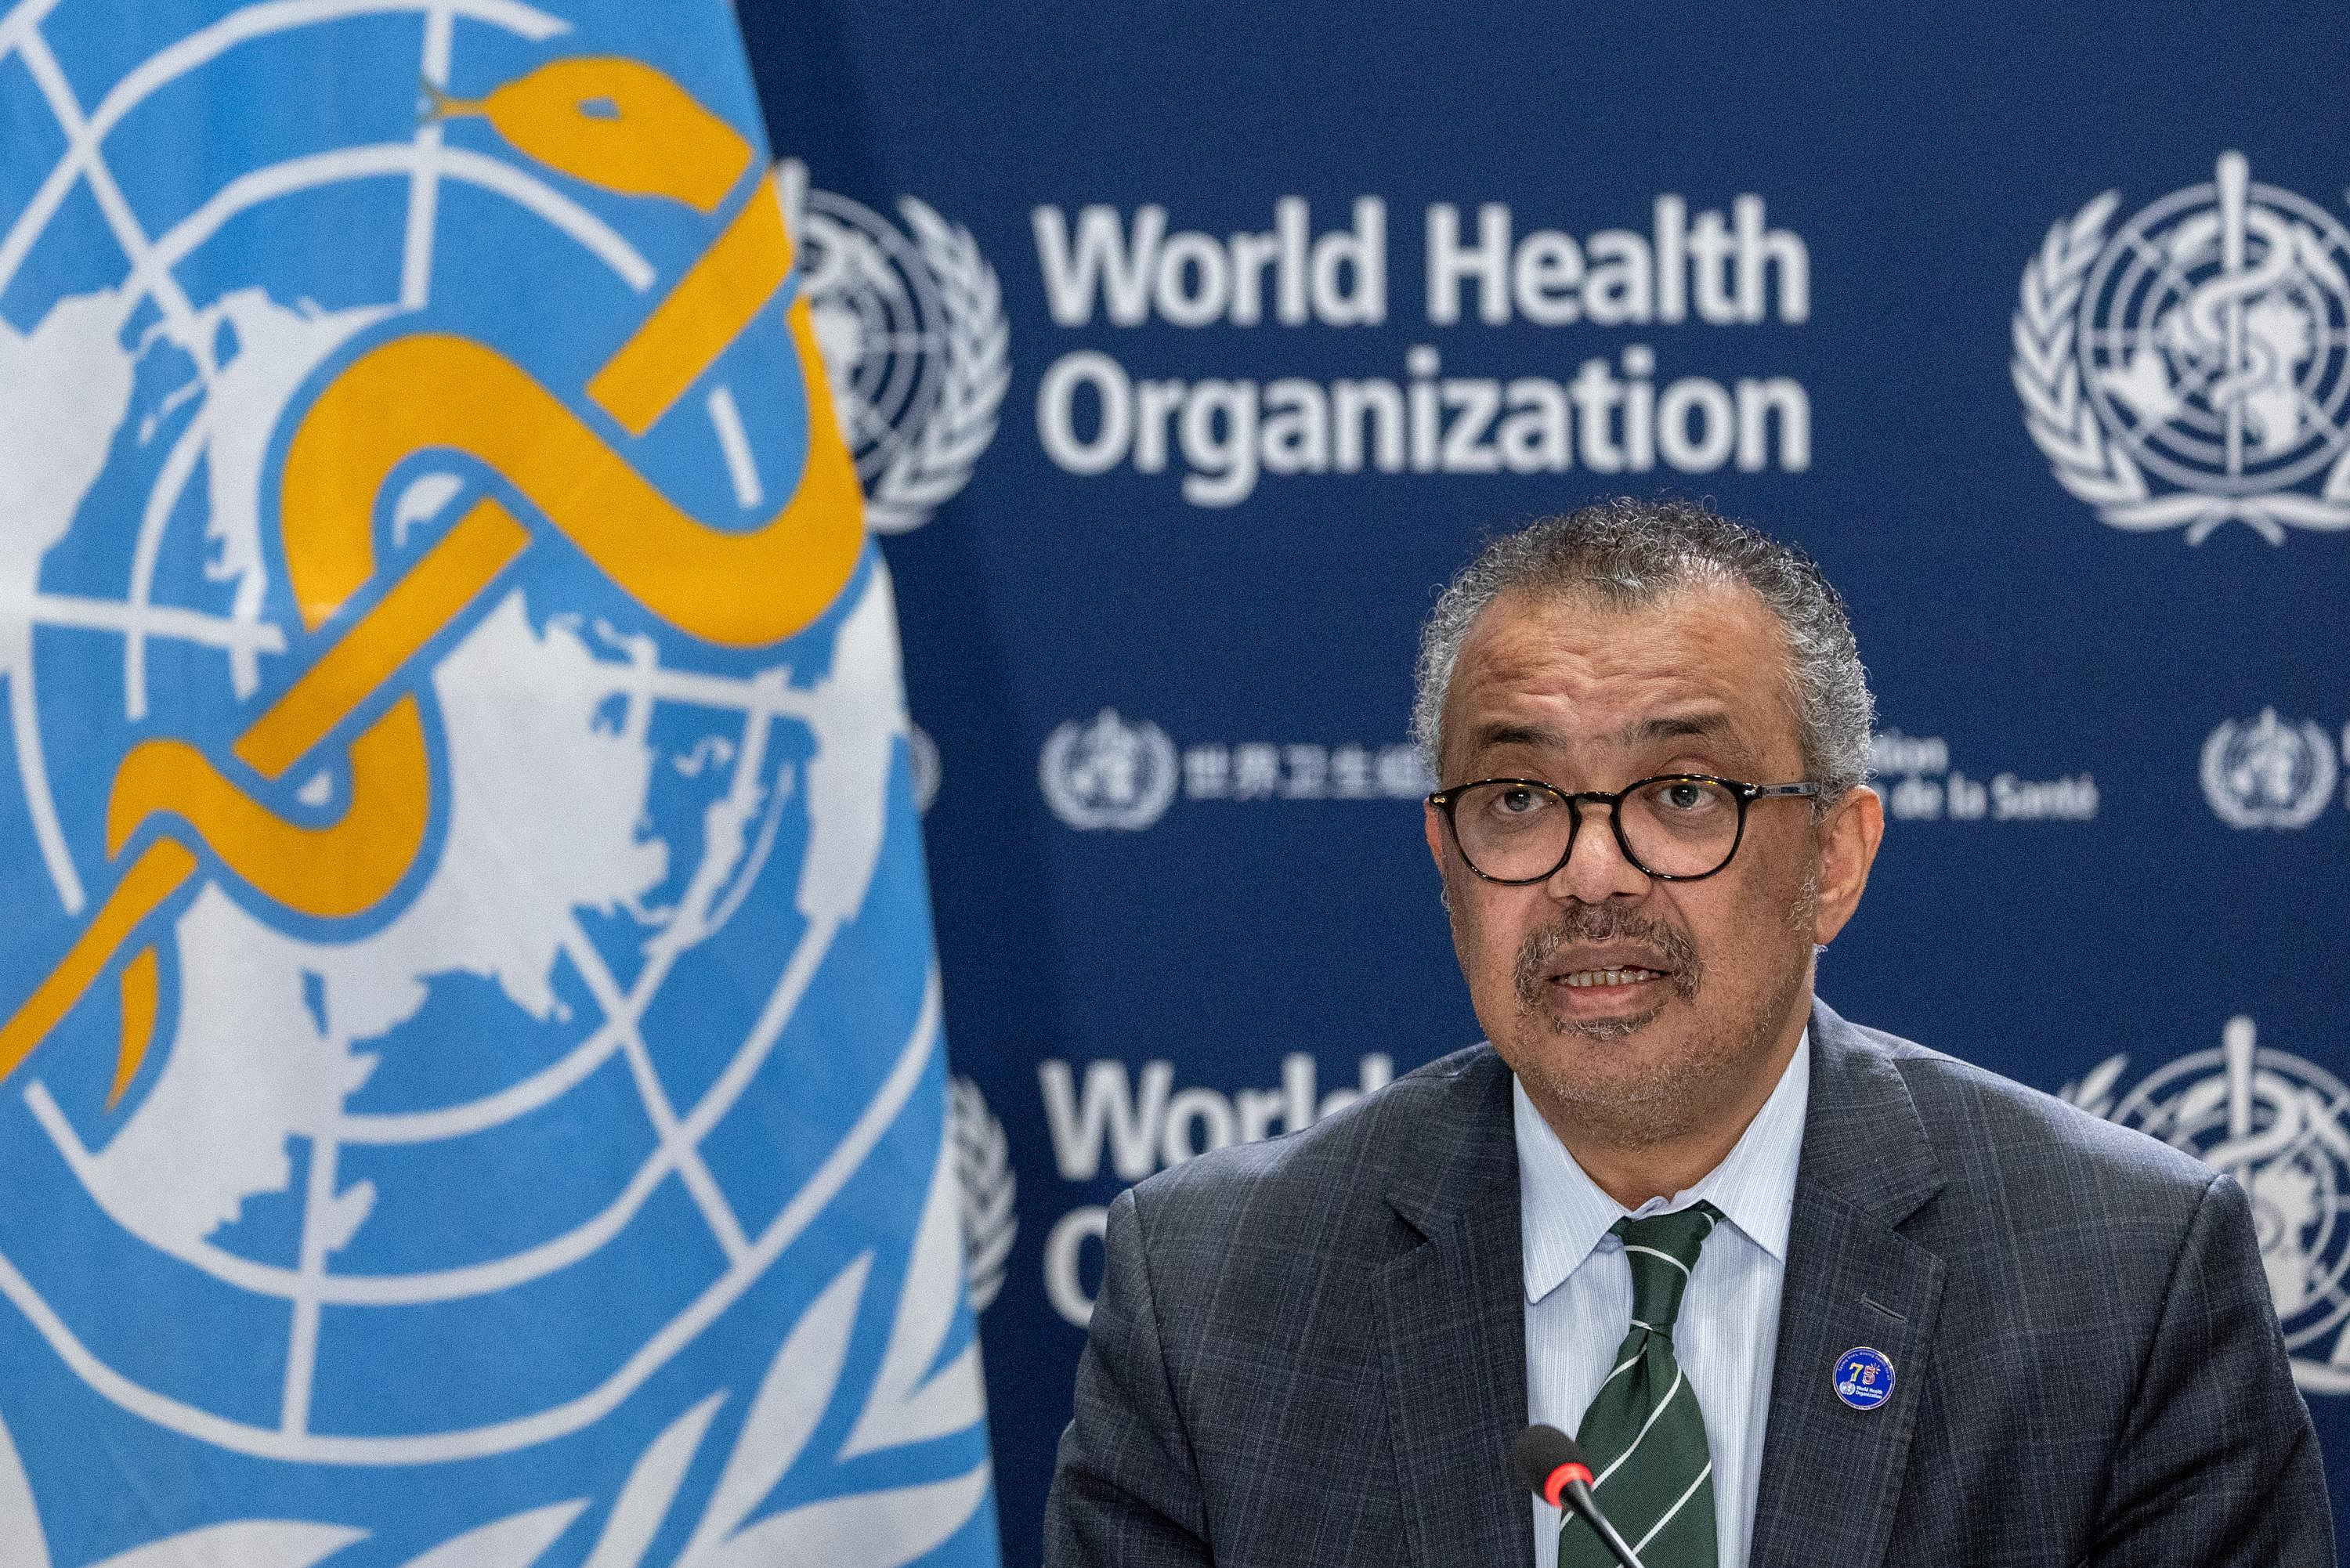 The world must prepare for future pandemics, says WHO boss